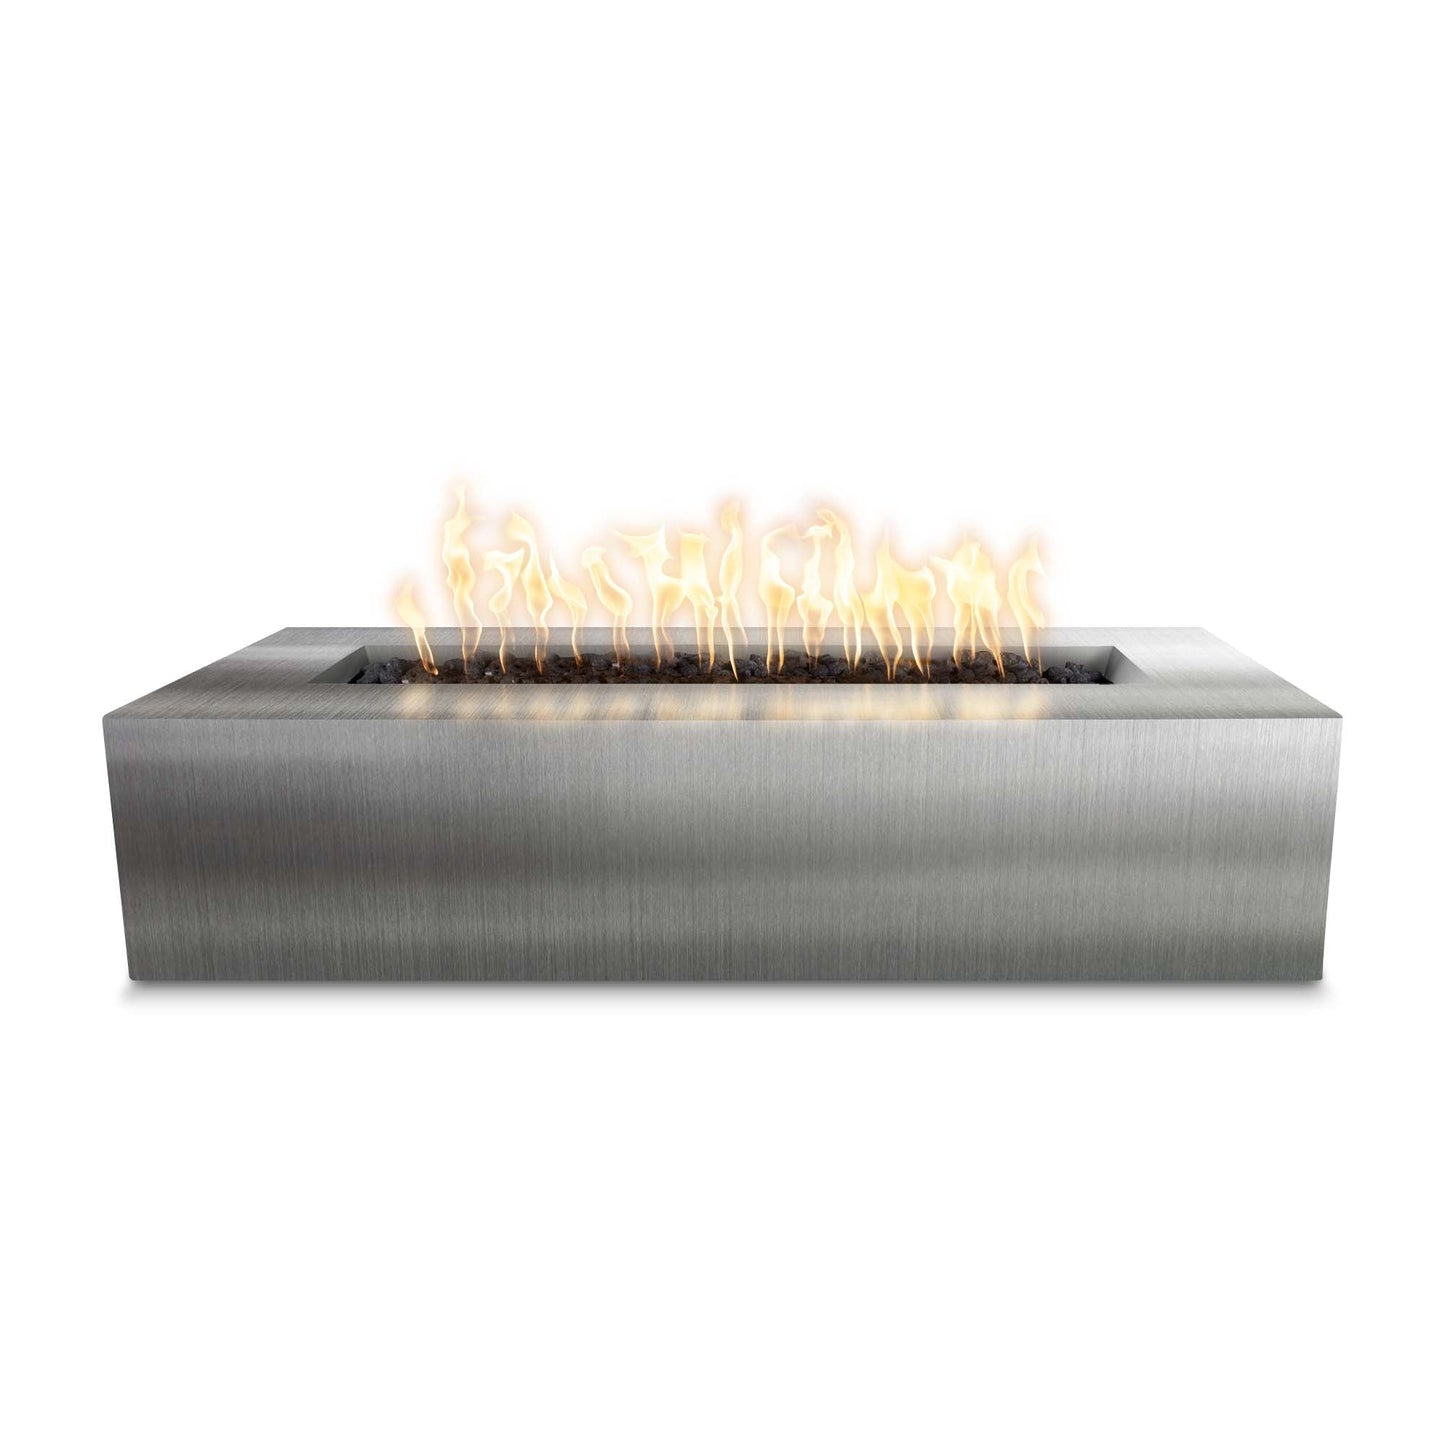 The Outdoor Plus Rectangular Regal 48" Hammered Copper Natural Gas Fire Pit with 110V Electronic Ignition